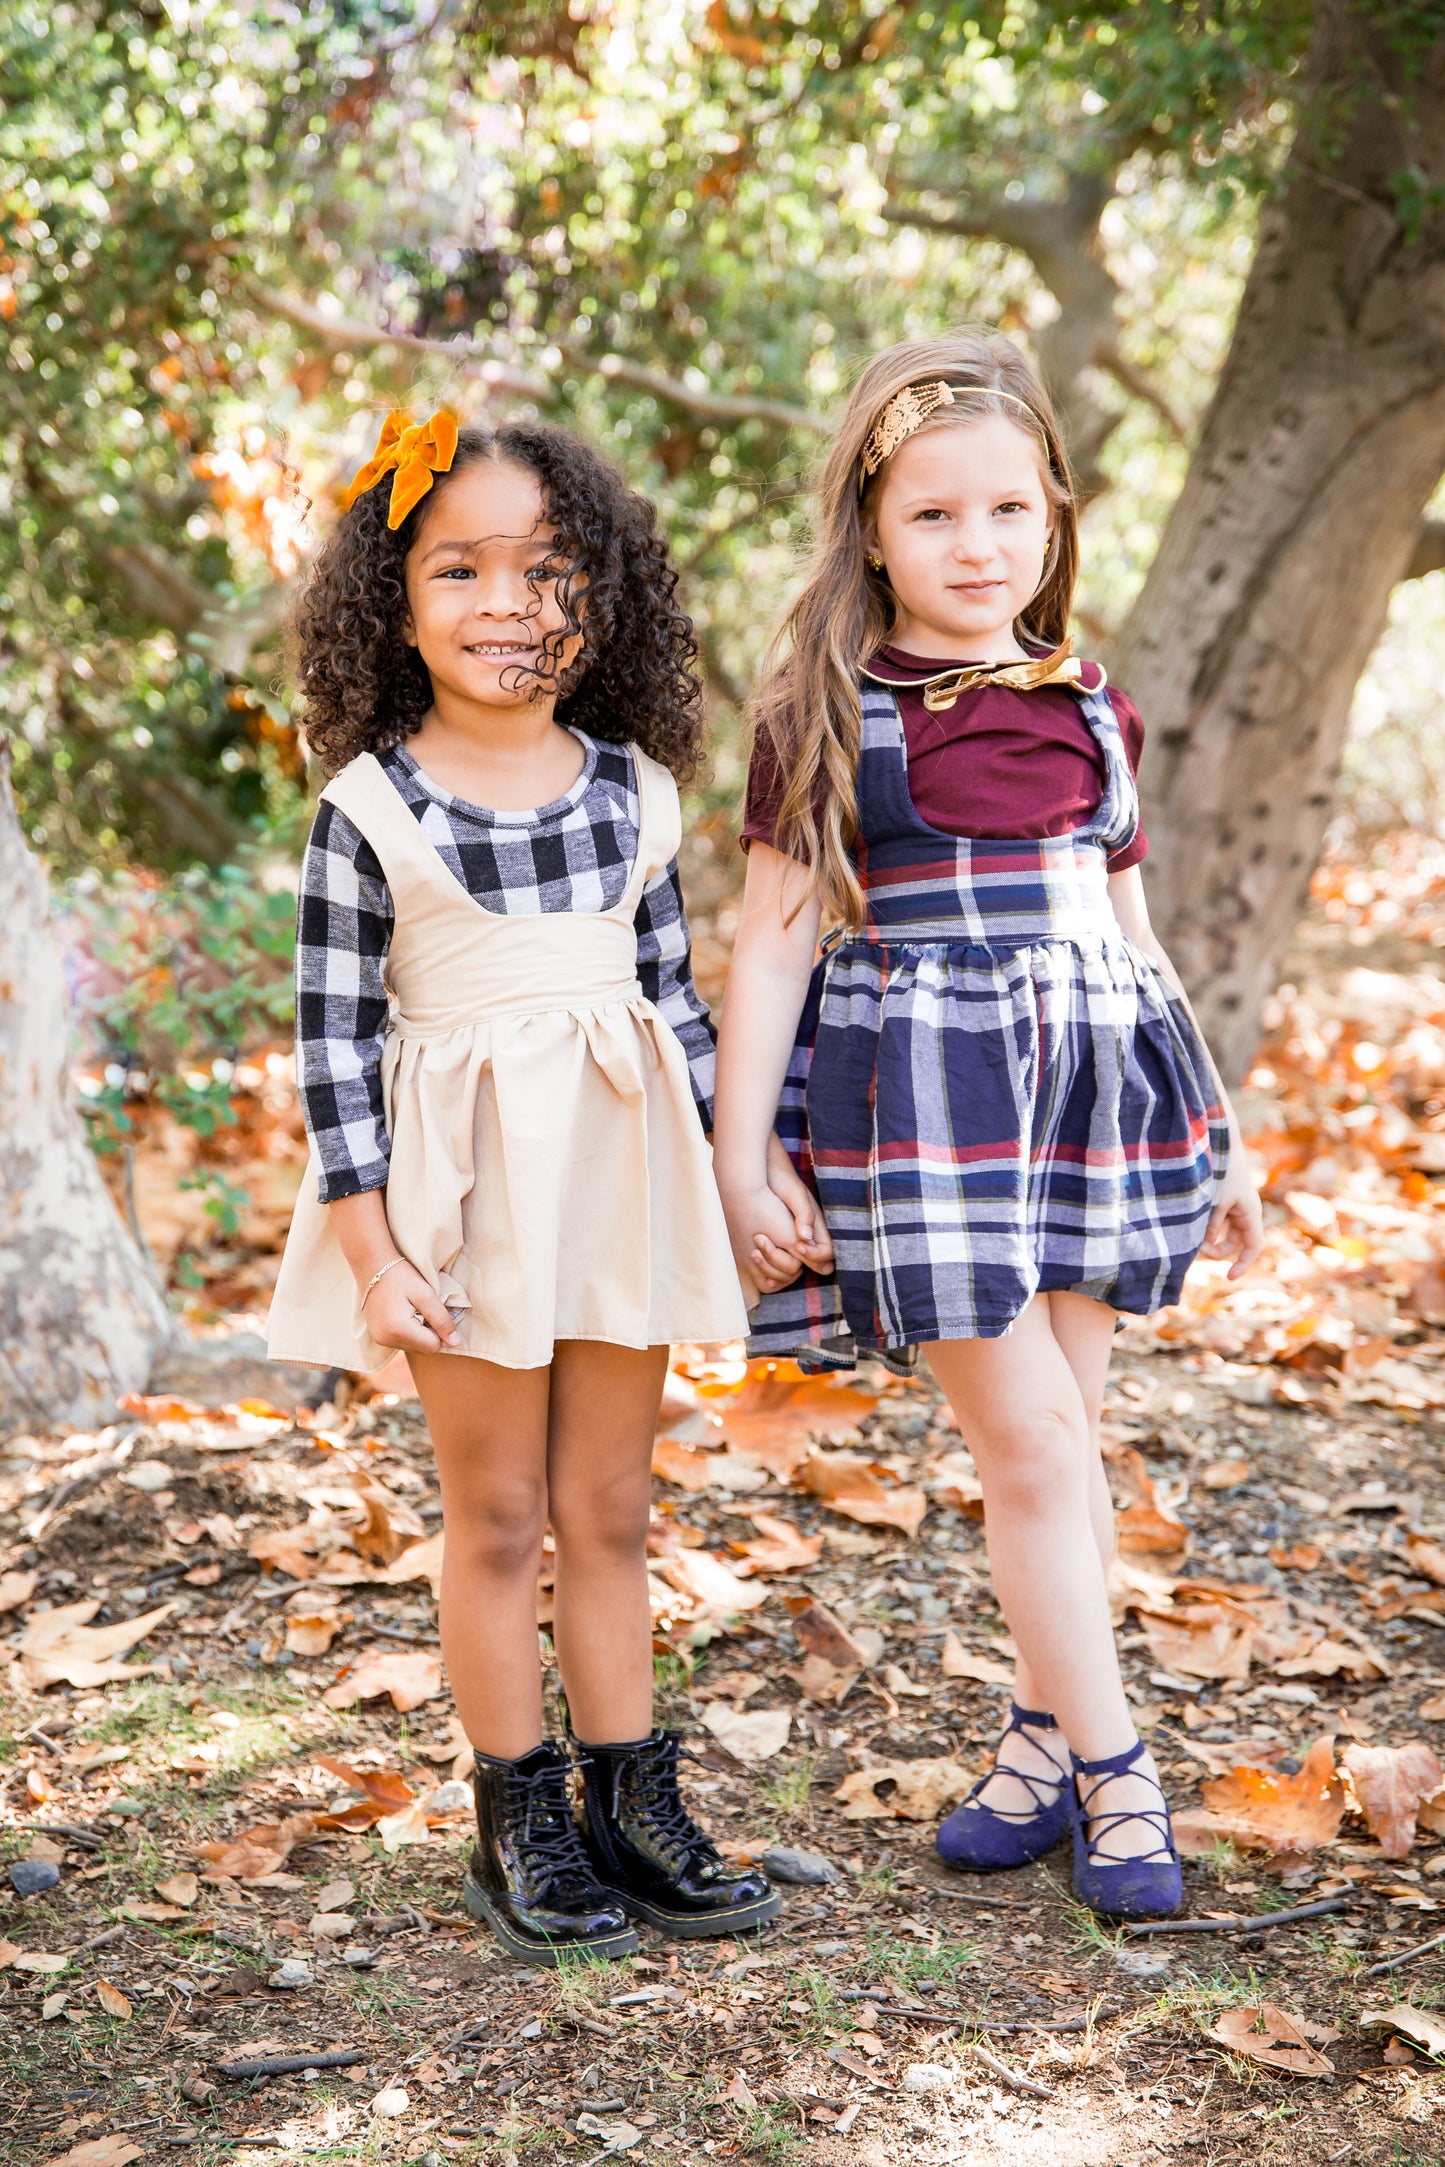 Autumn pinafore Back To School Dress - pinafore - school pinafore - back to school outfit - first day of school dress - school dress